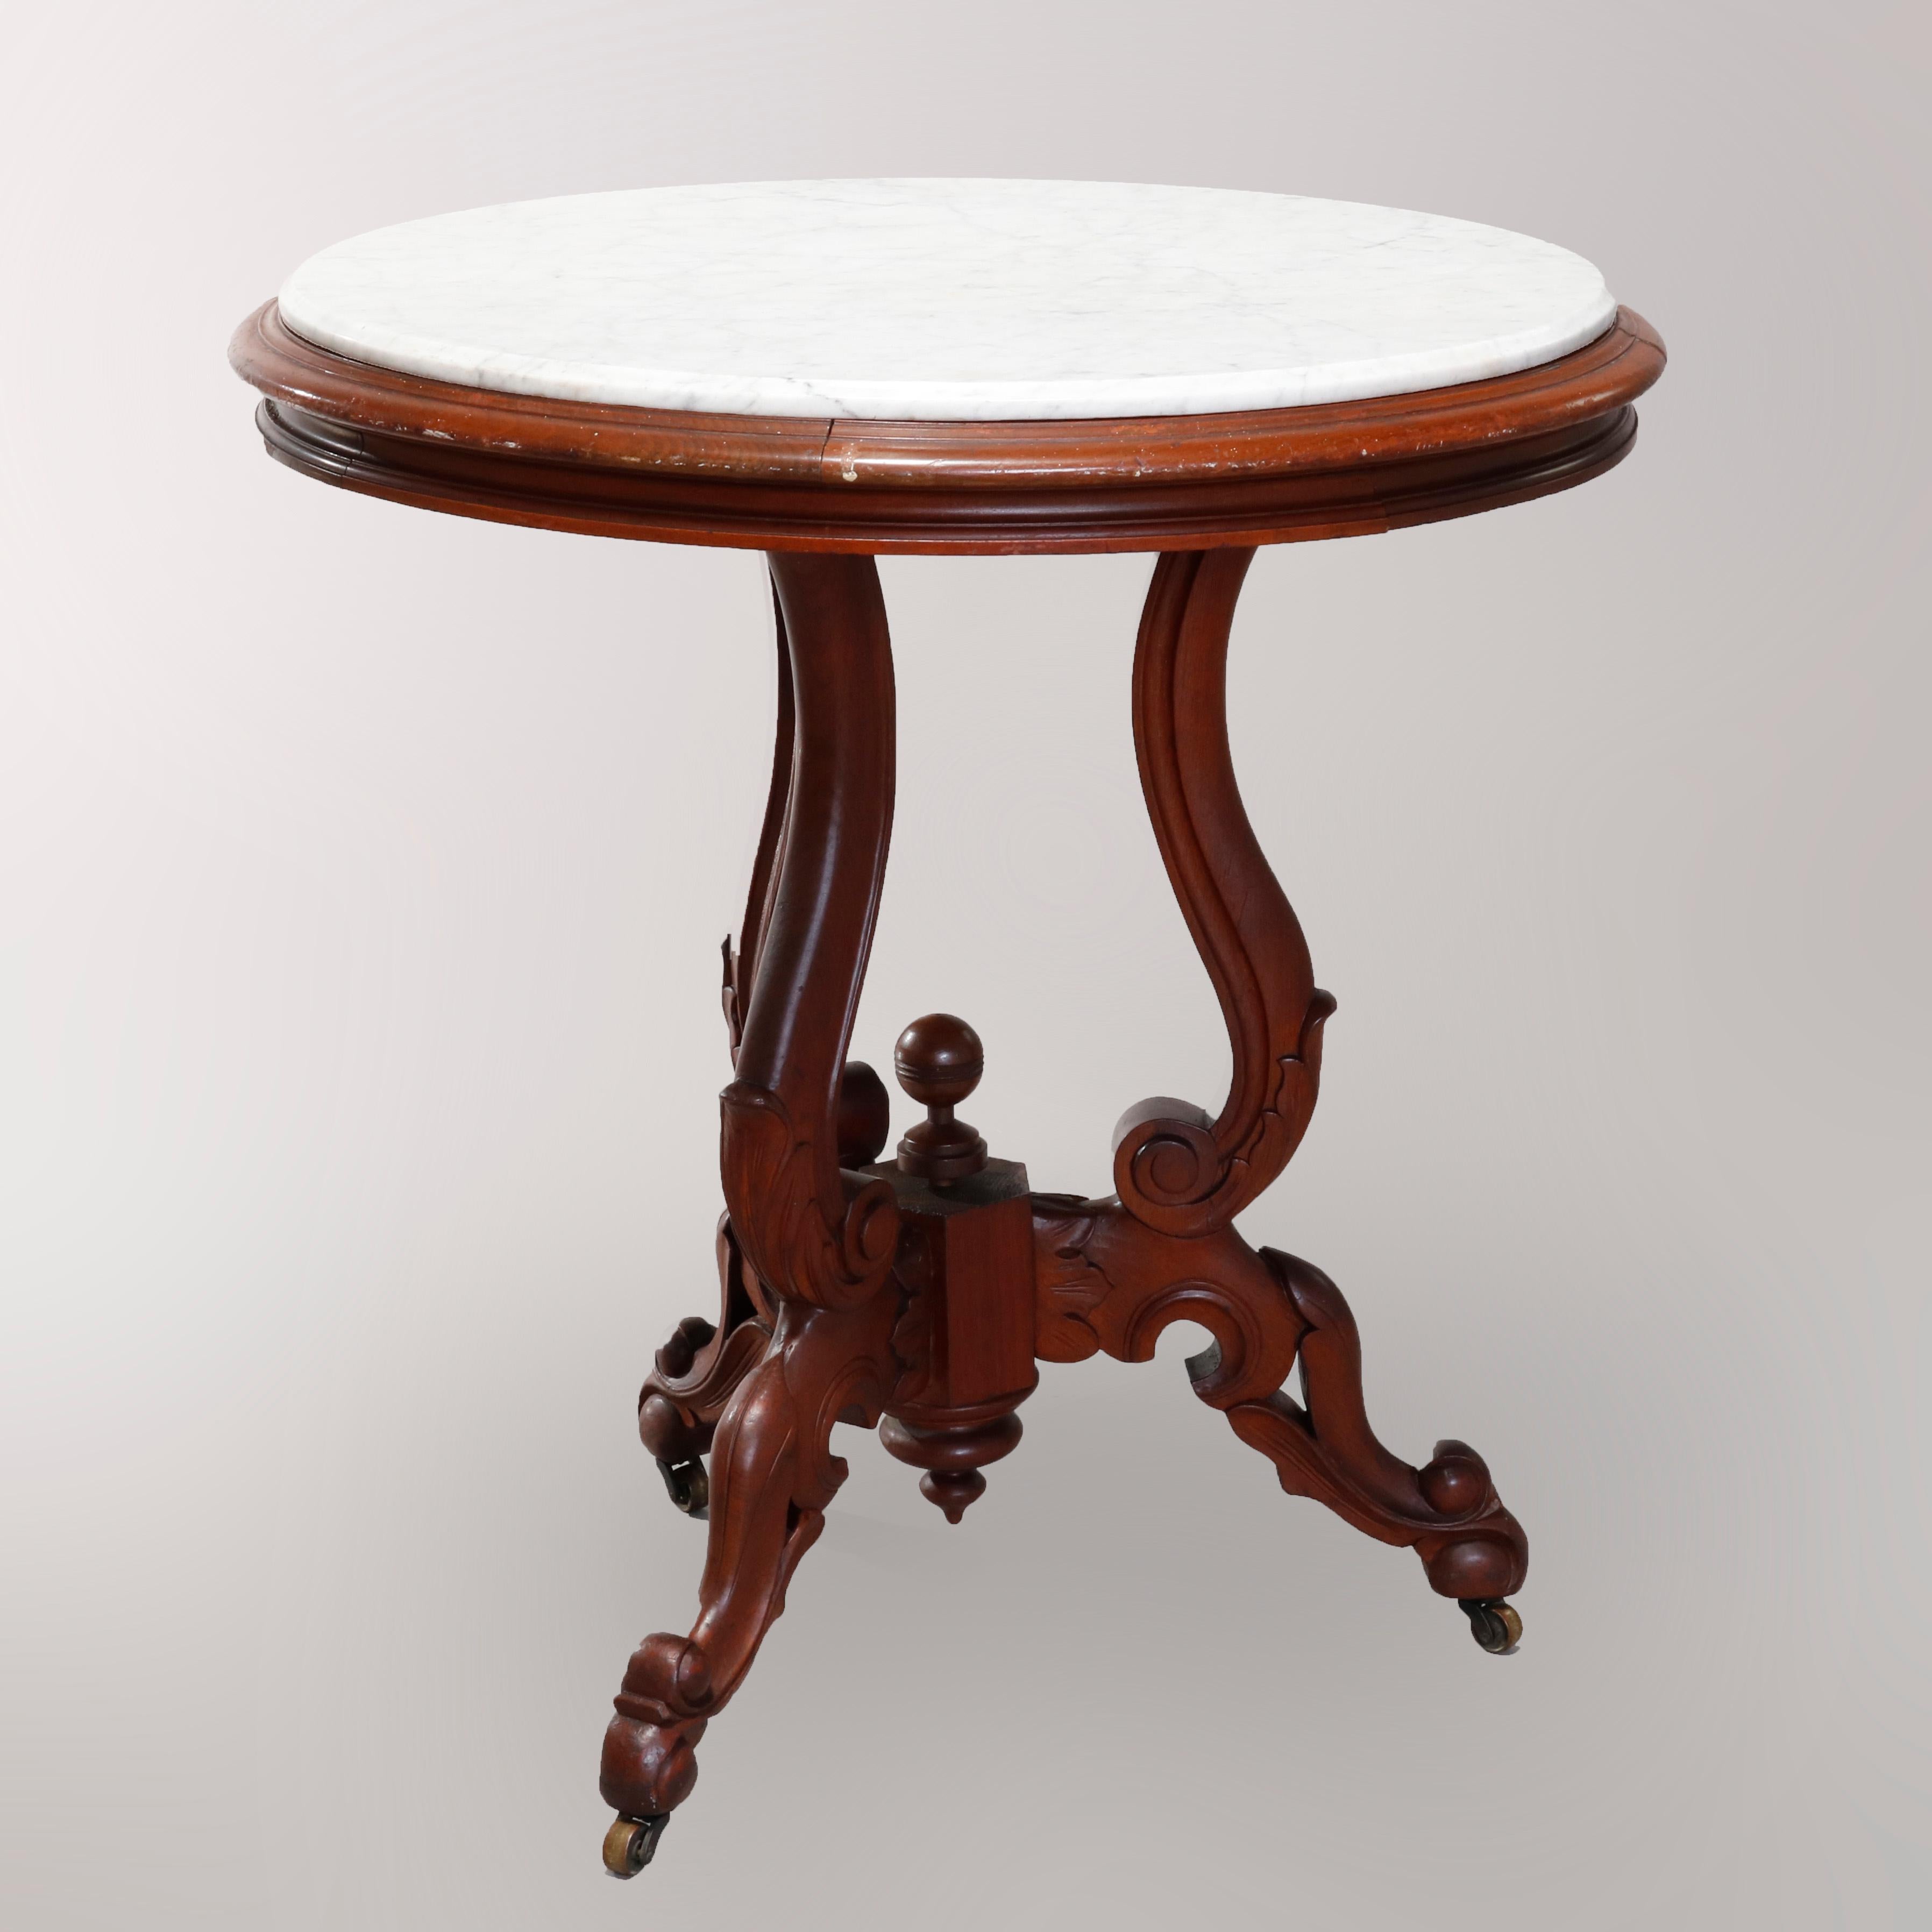 An antique Renaissance Revival center table offers round form with beveled marble top surmounting carved walnut base with three scroll form supports terminating in central drop and raised finials, raised on carved acanthus cabriole legs with